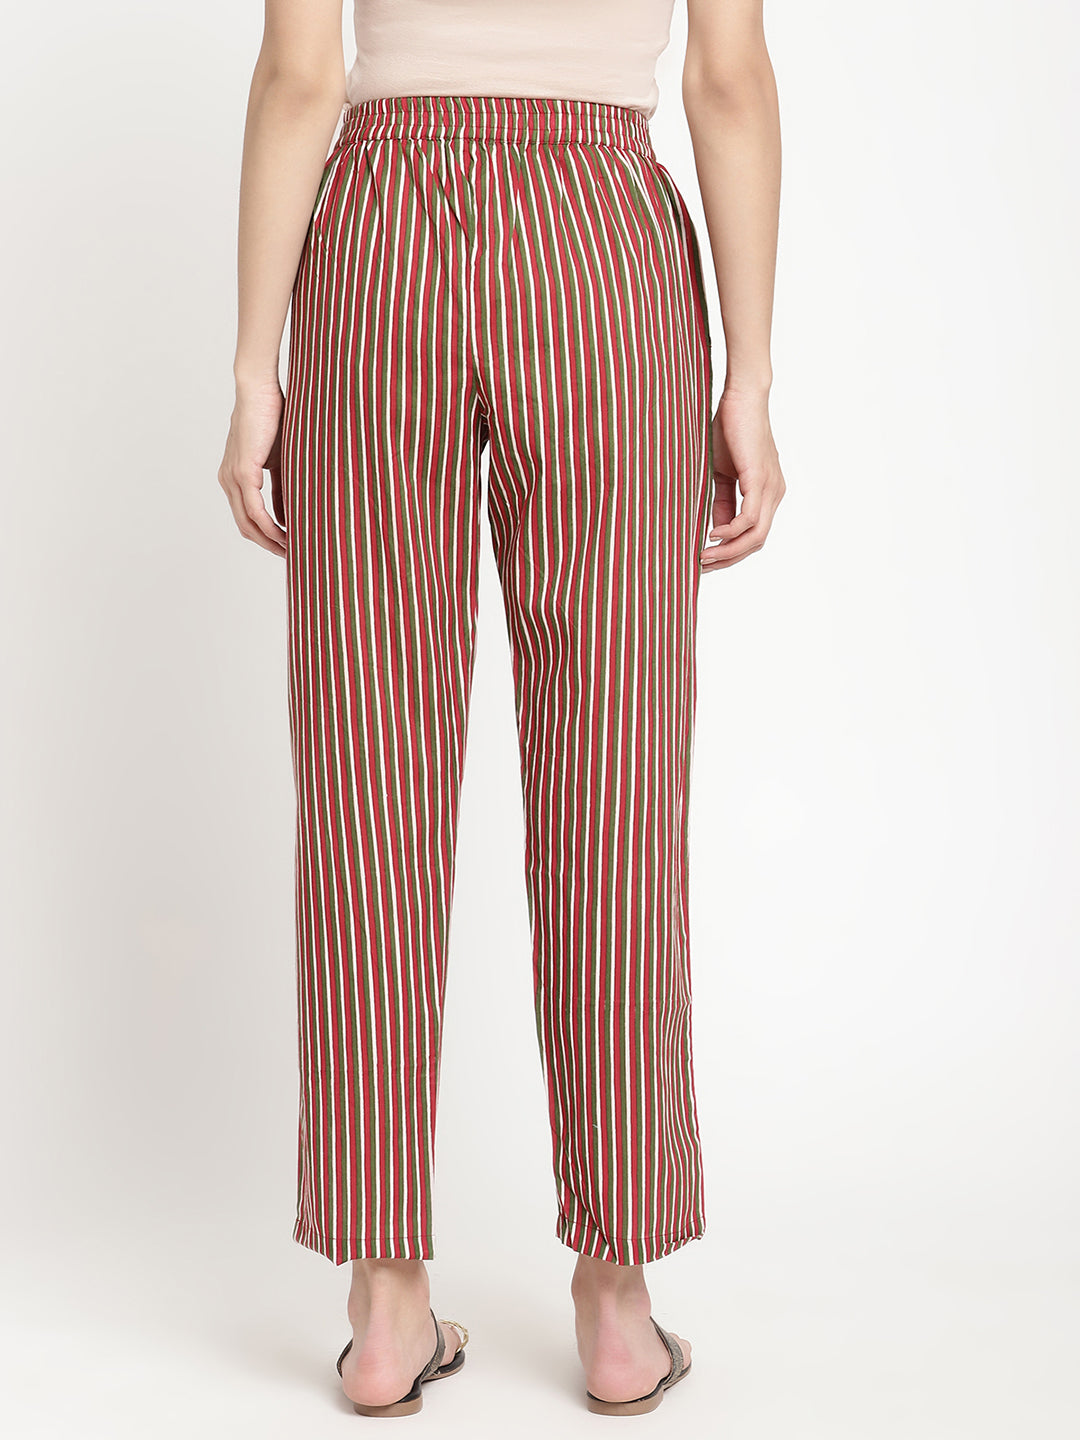 Woman wearing dark brown striped pants made of cotton fabric. 